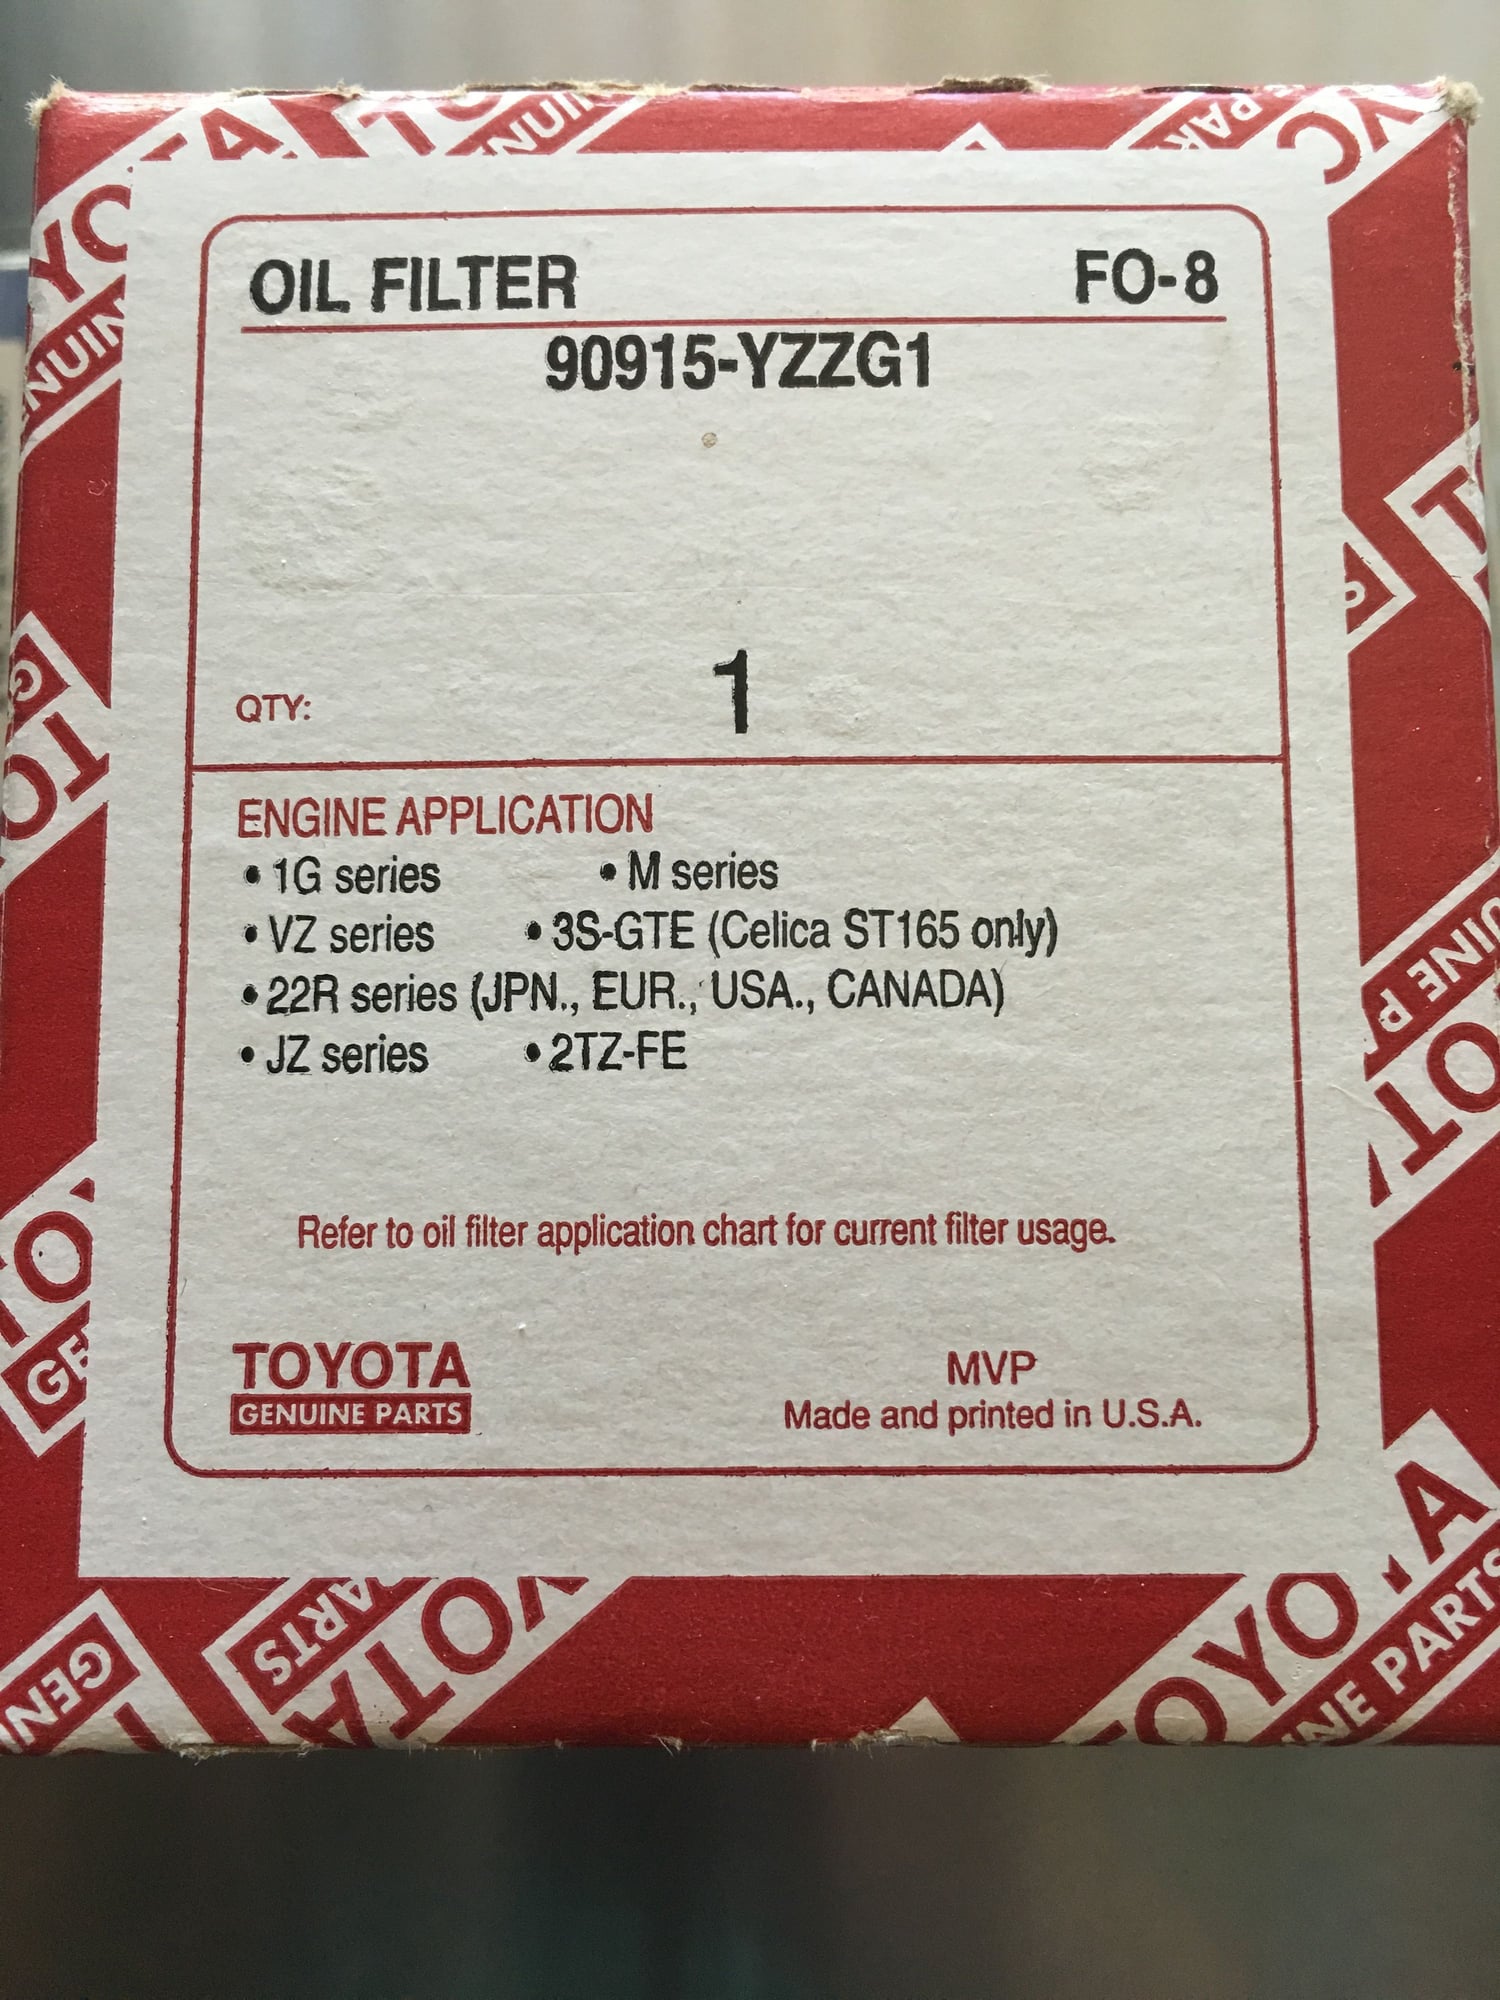 Miscellaneous - Original Toyota Oil Filter 90915-YZZG1 - New - Los Angeles, CA 90017, United States